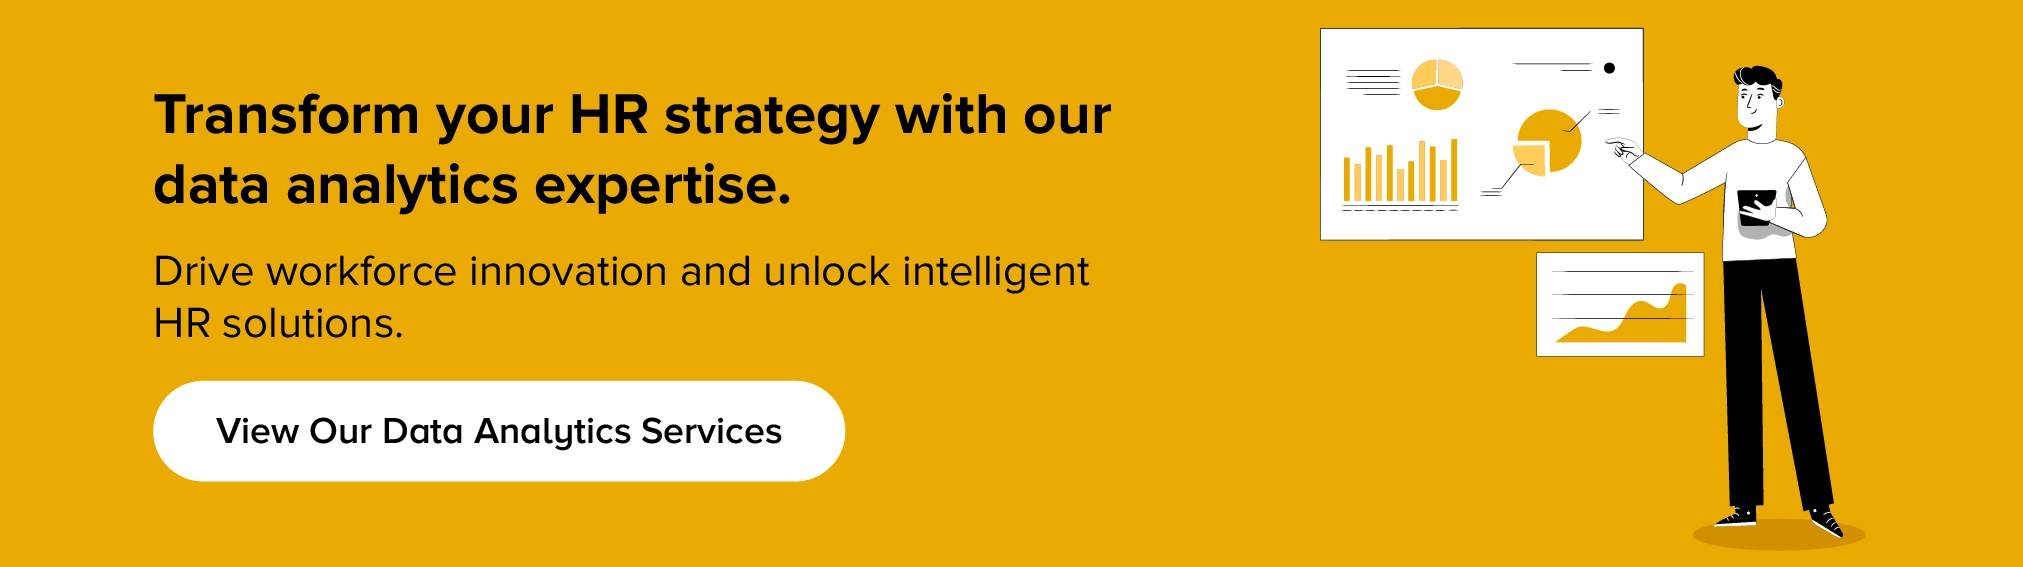 collaborate with us to drive workforce innovation and unlock intelligent HR solutions